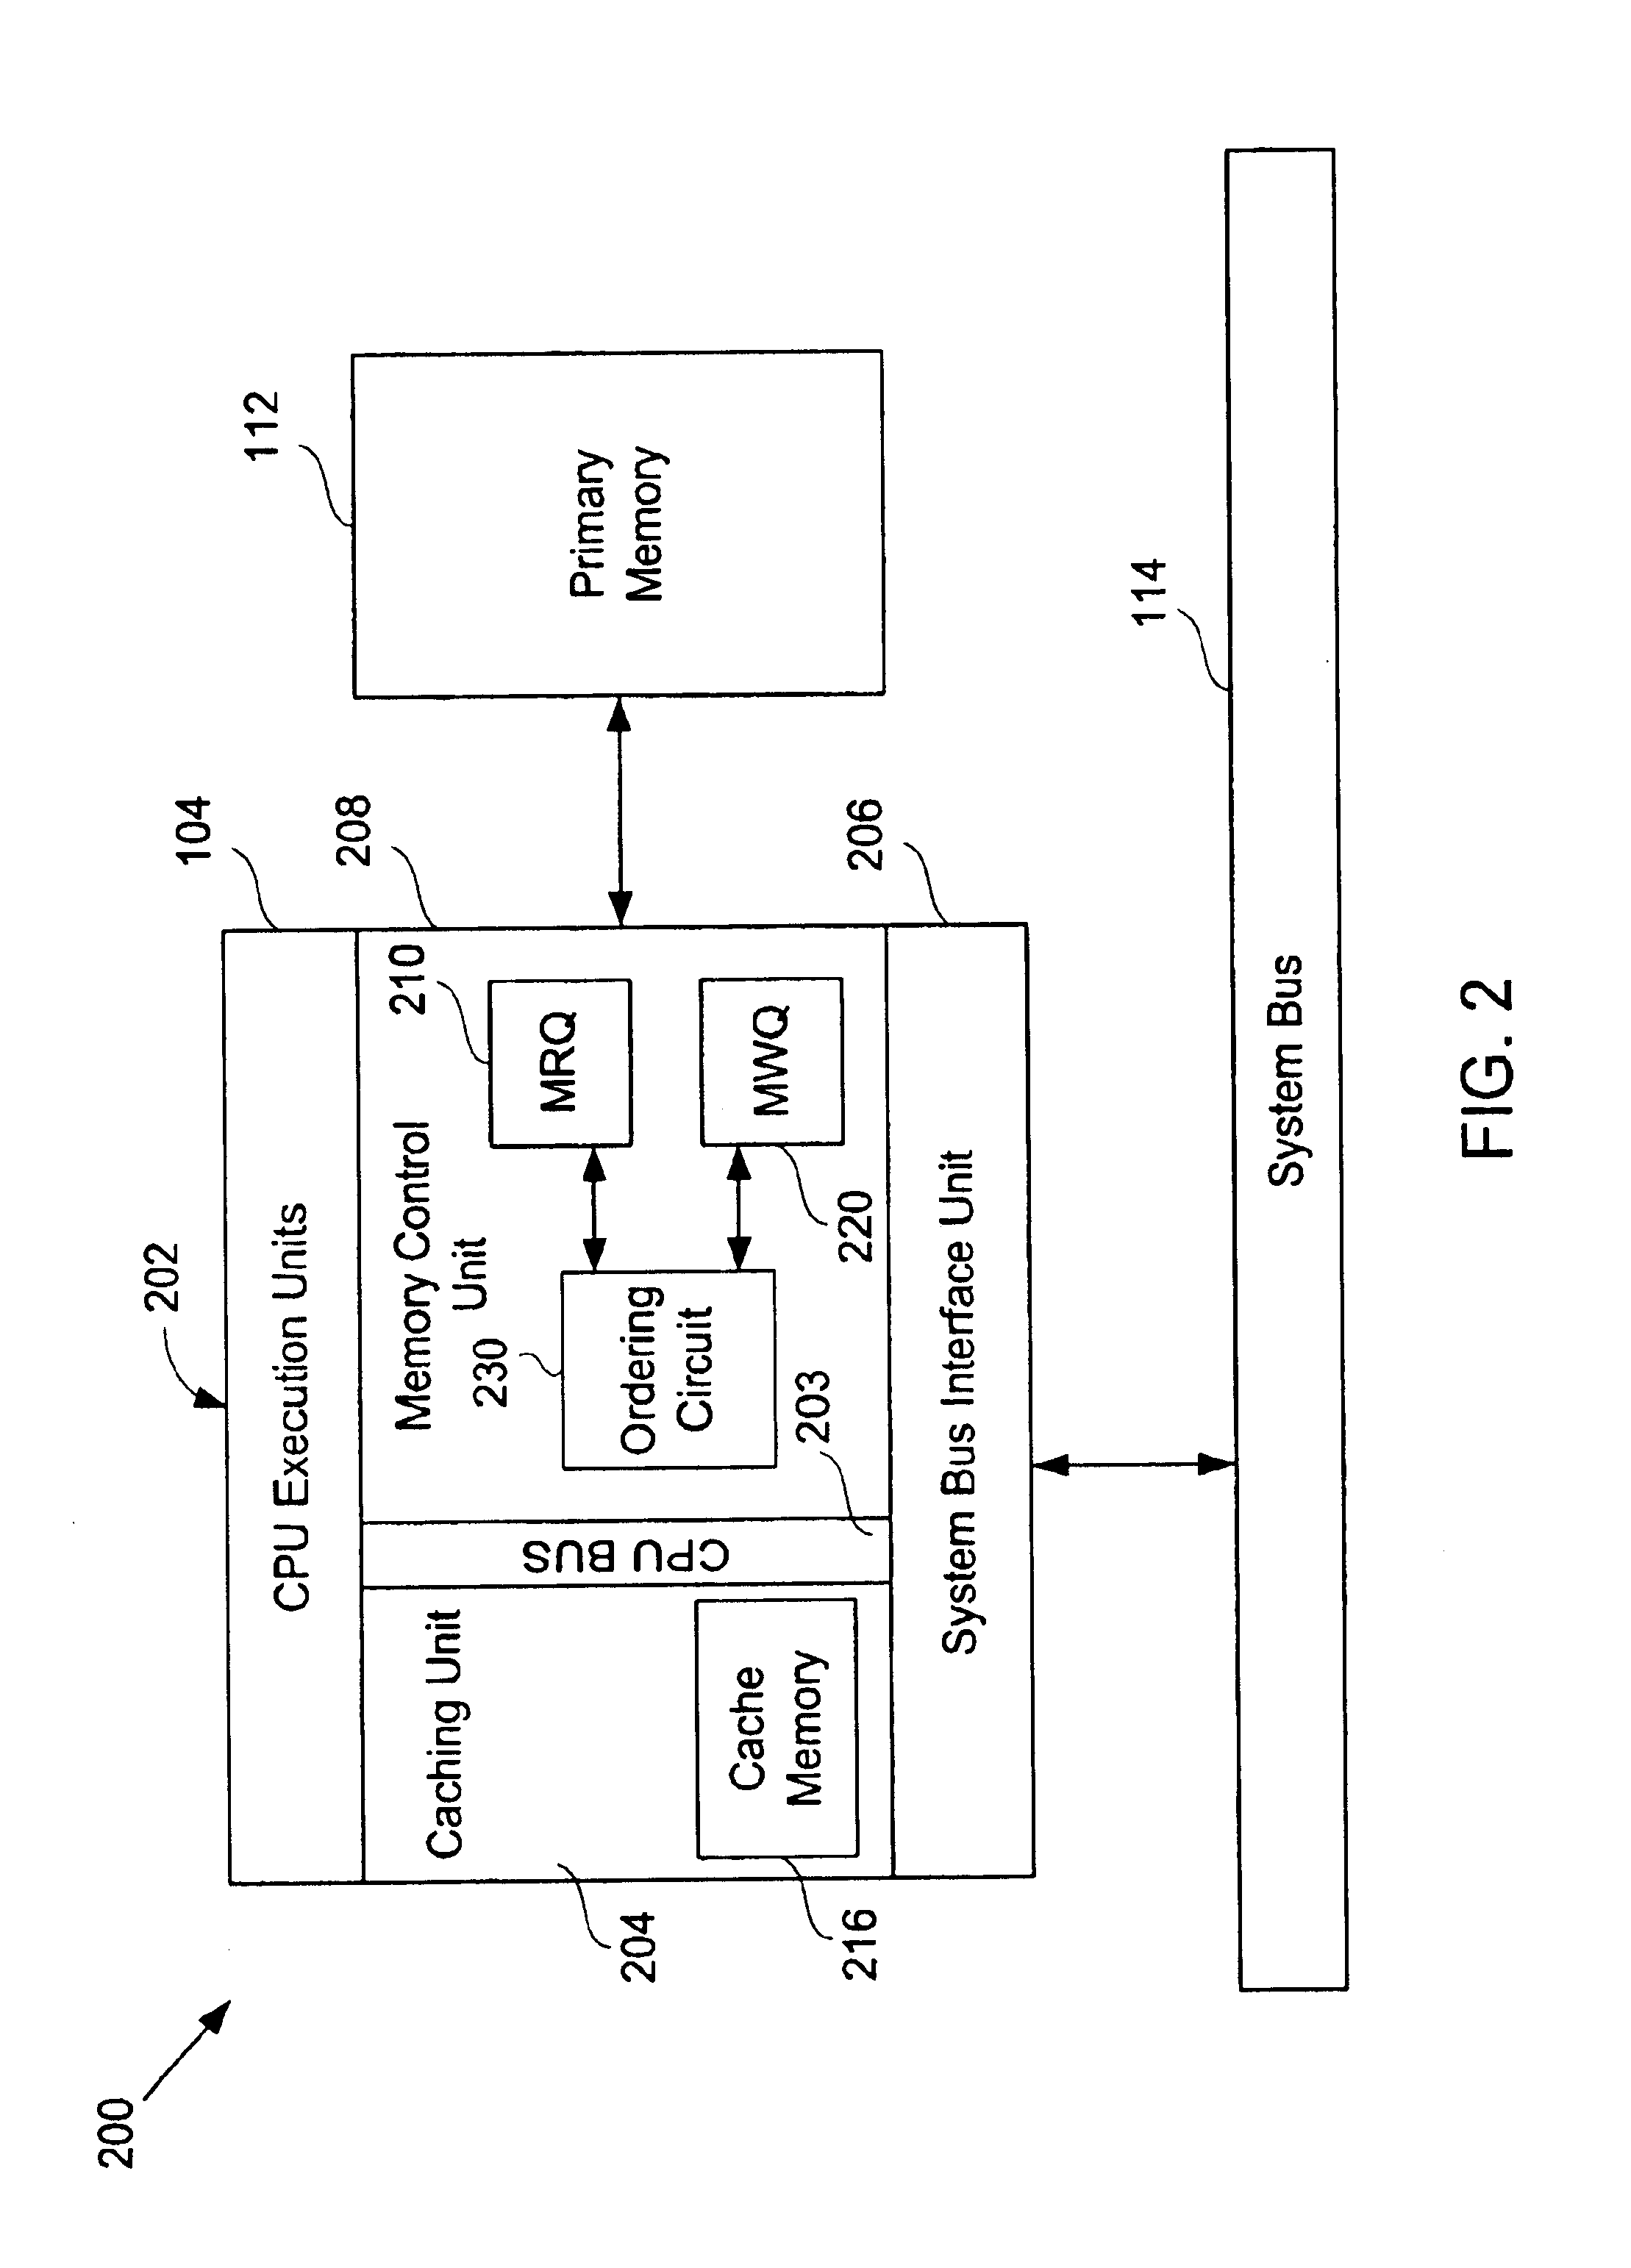 Memory controller and method using read and write queues and an ordering queue for dispatching read and write memory requests out of order to reduce memory latency